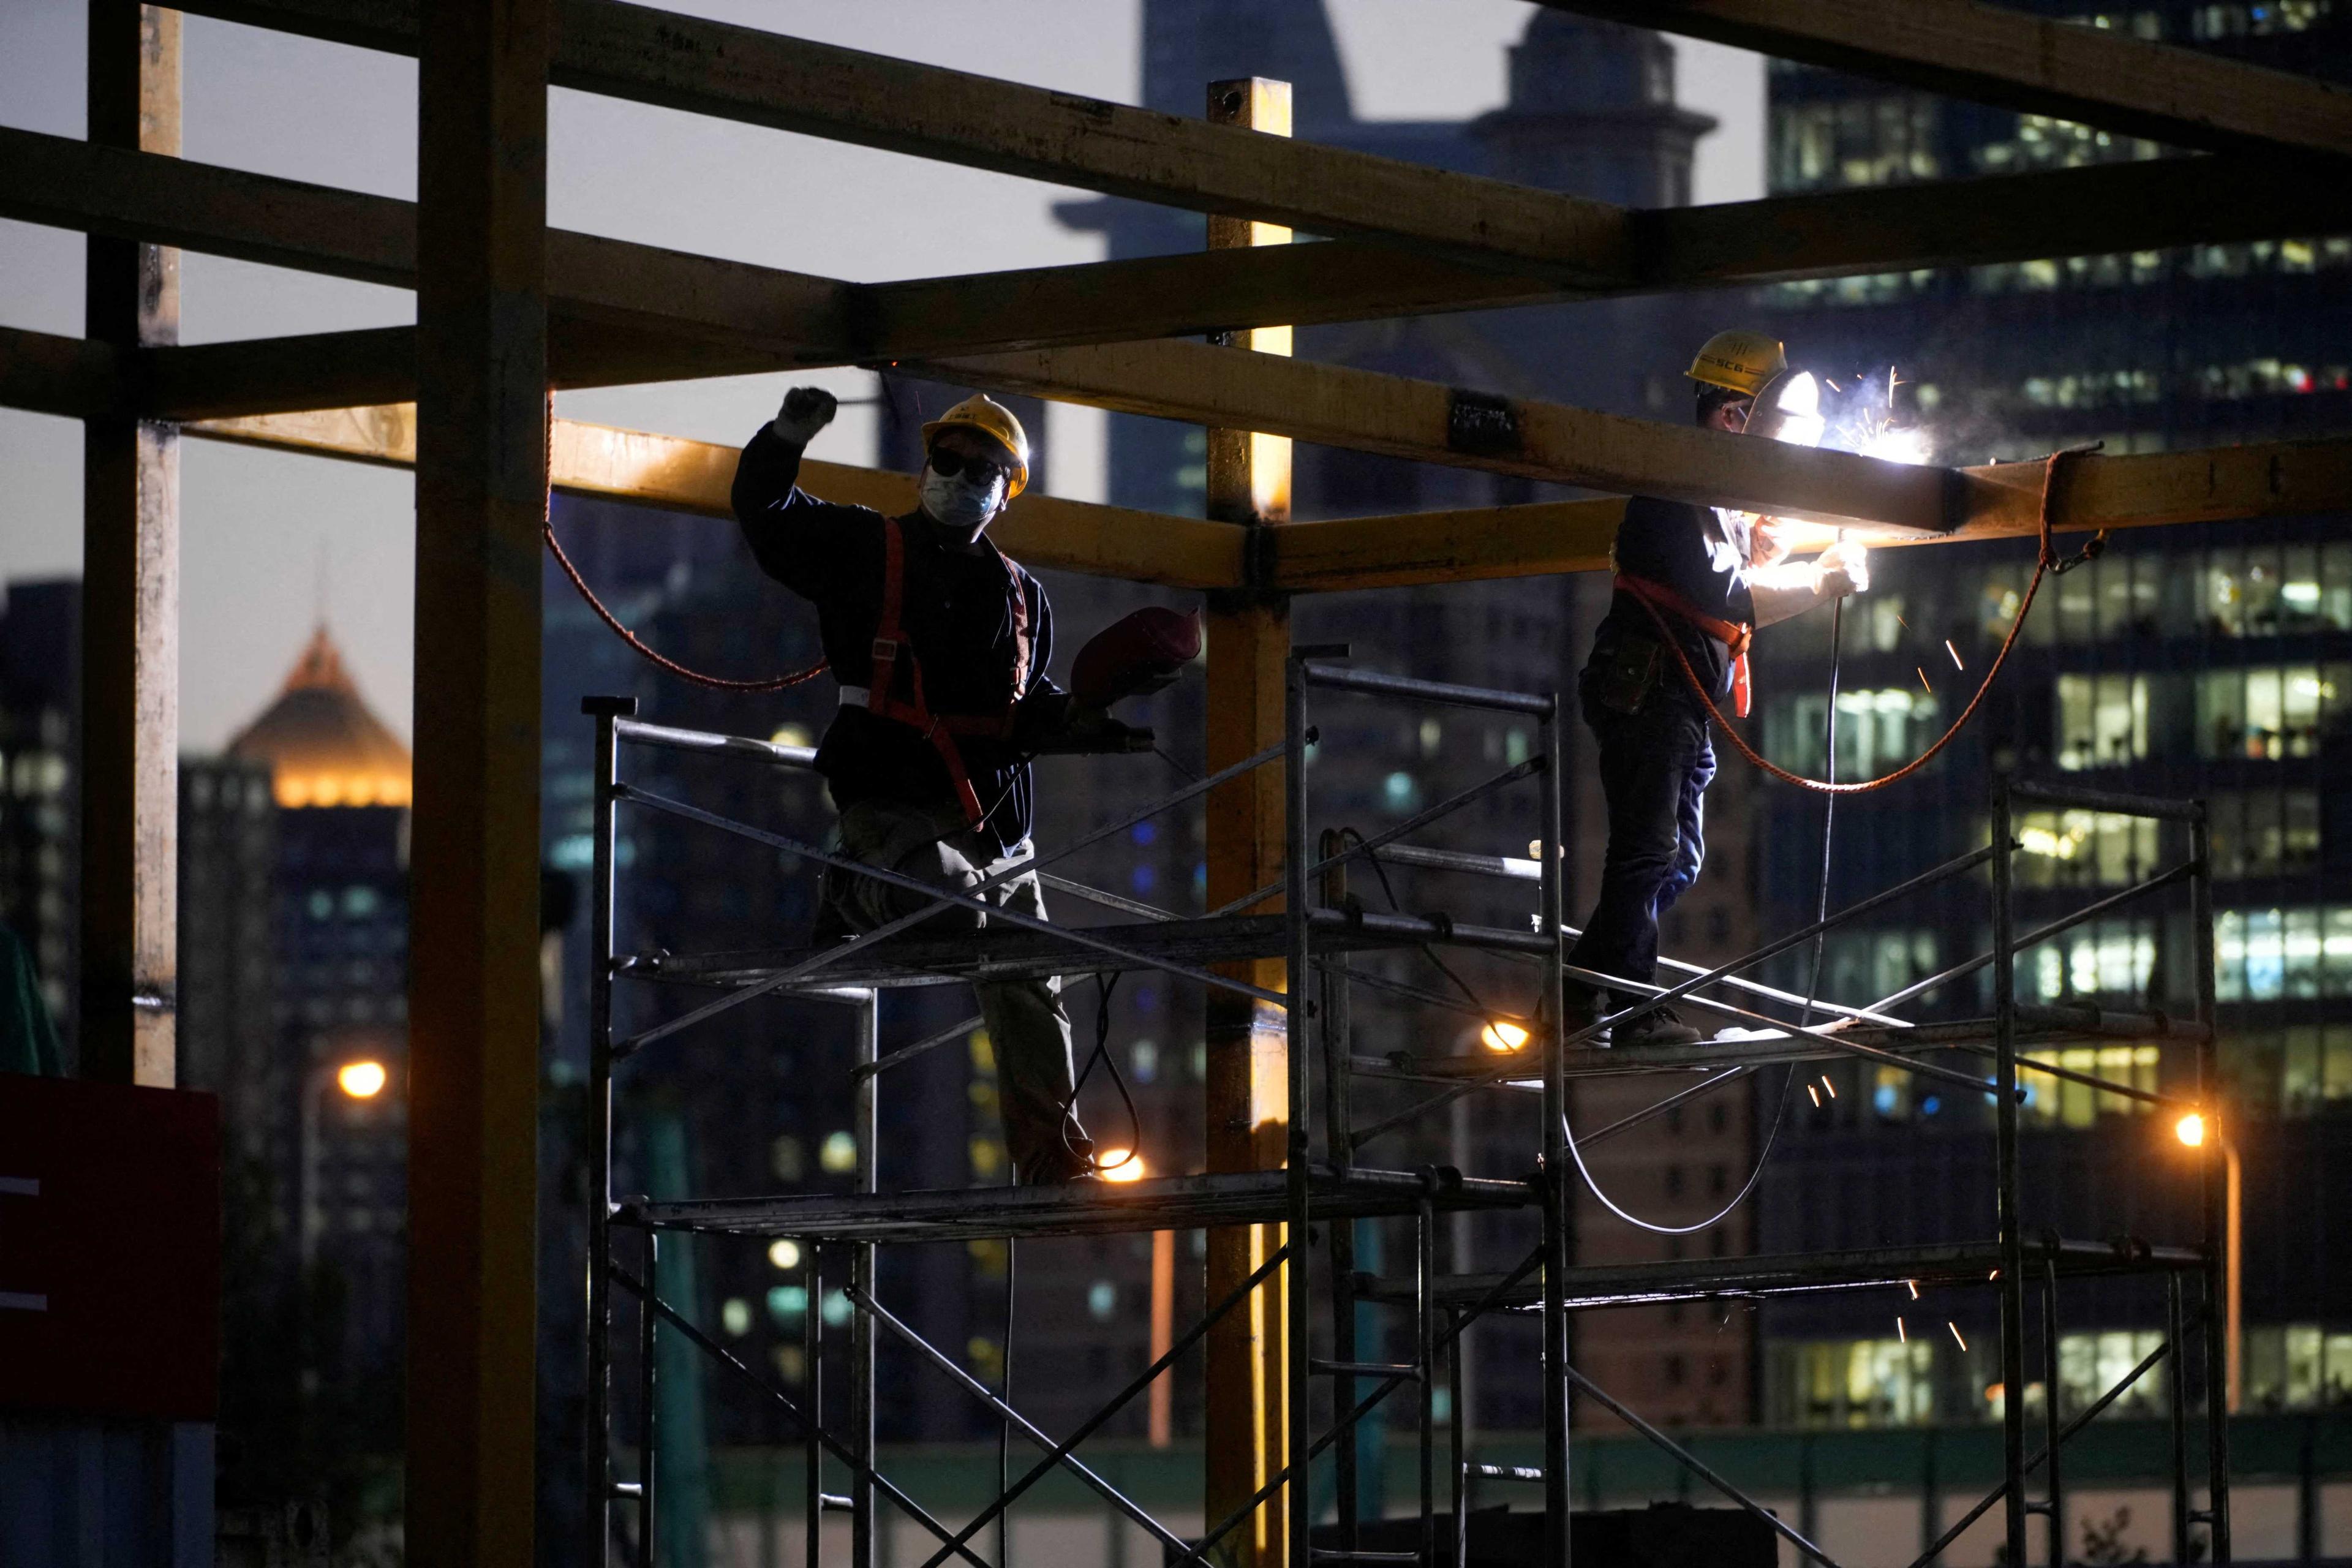 Workers work at a construction site in Shanghai, China, Oct 13. Photo: Reuters